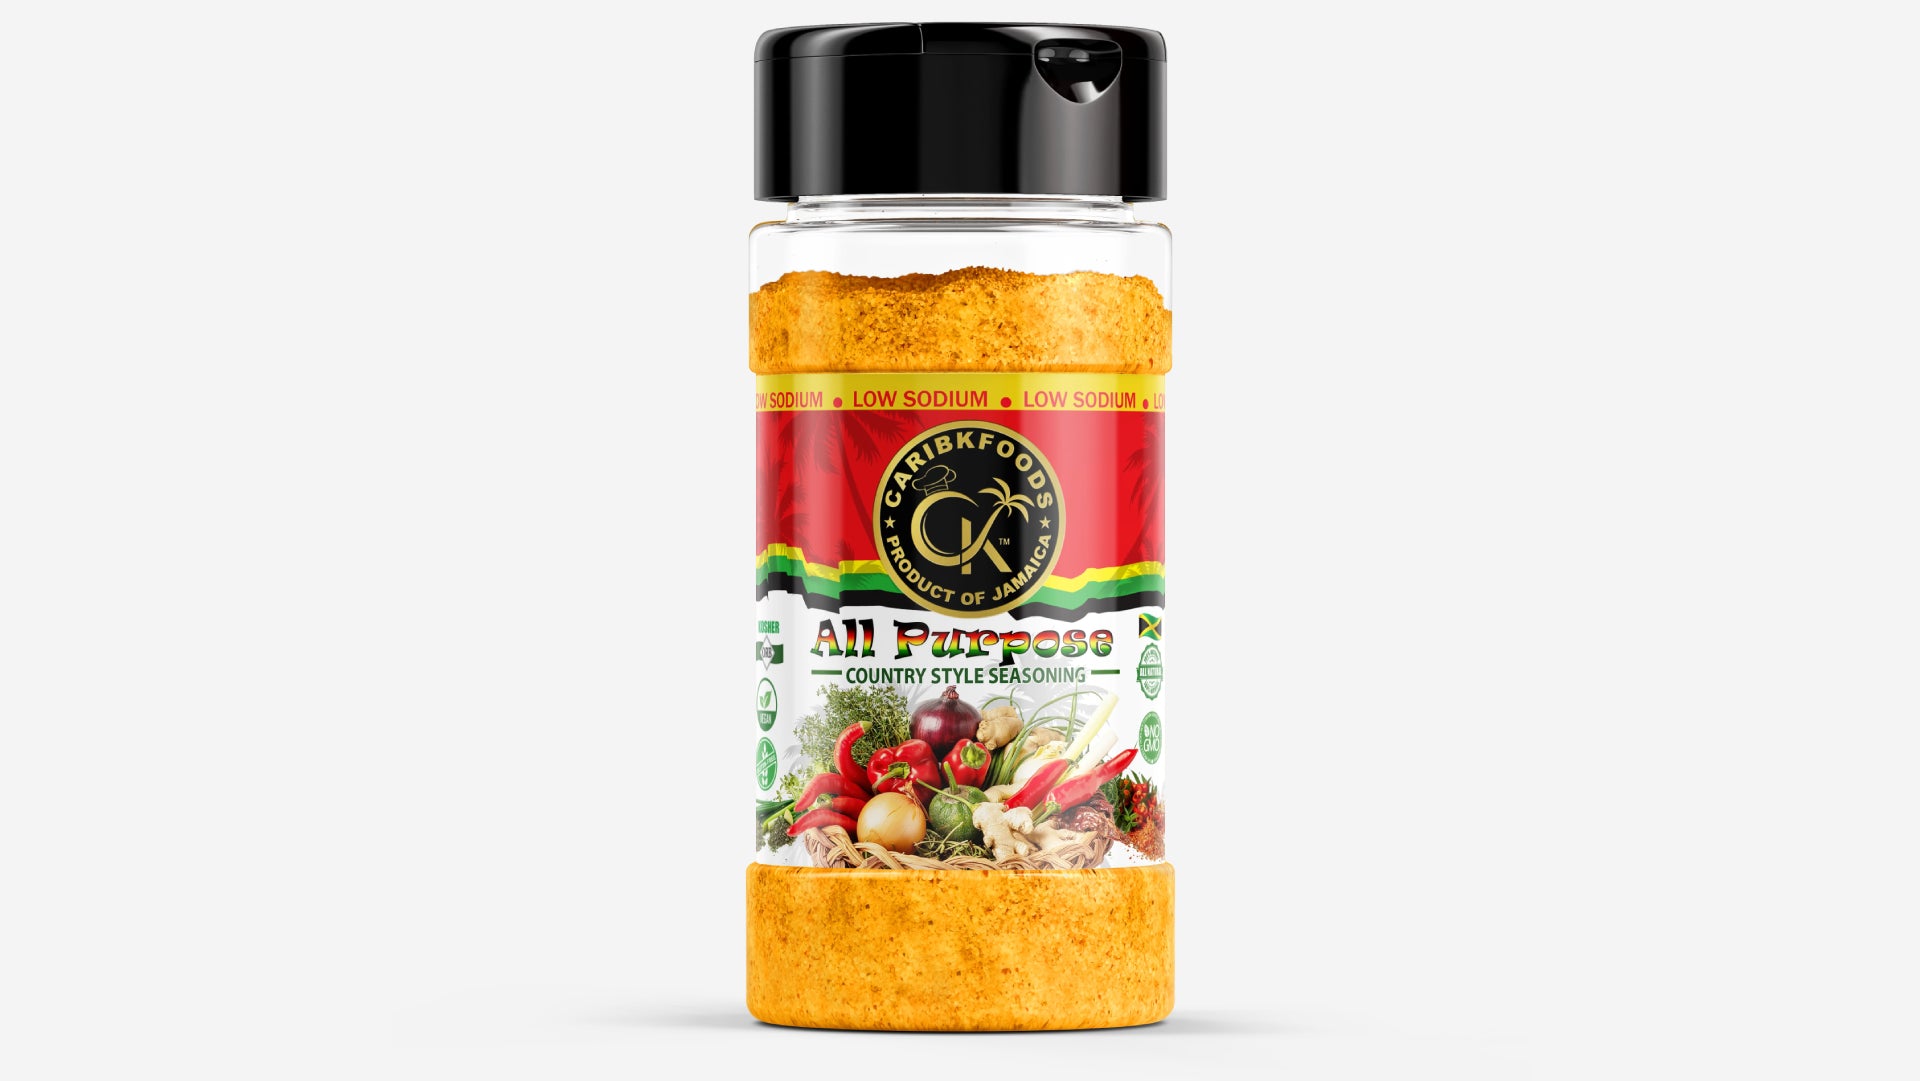 Exciting News: Caribbean Kitchen's New All Purpose Seasoning Is On The Way!